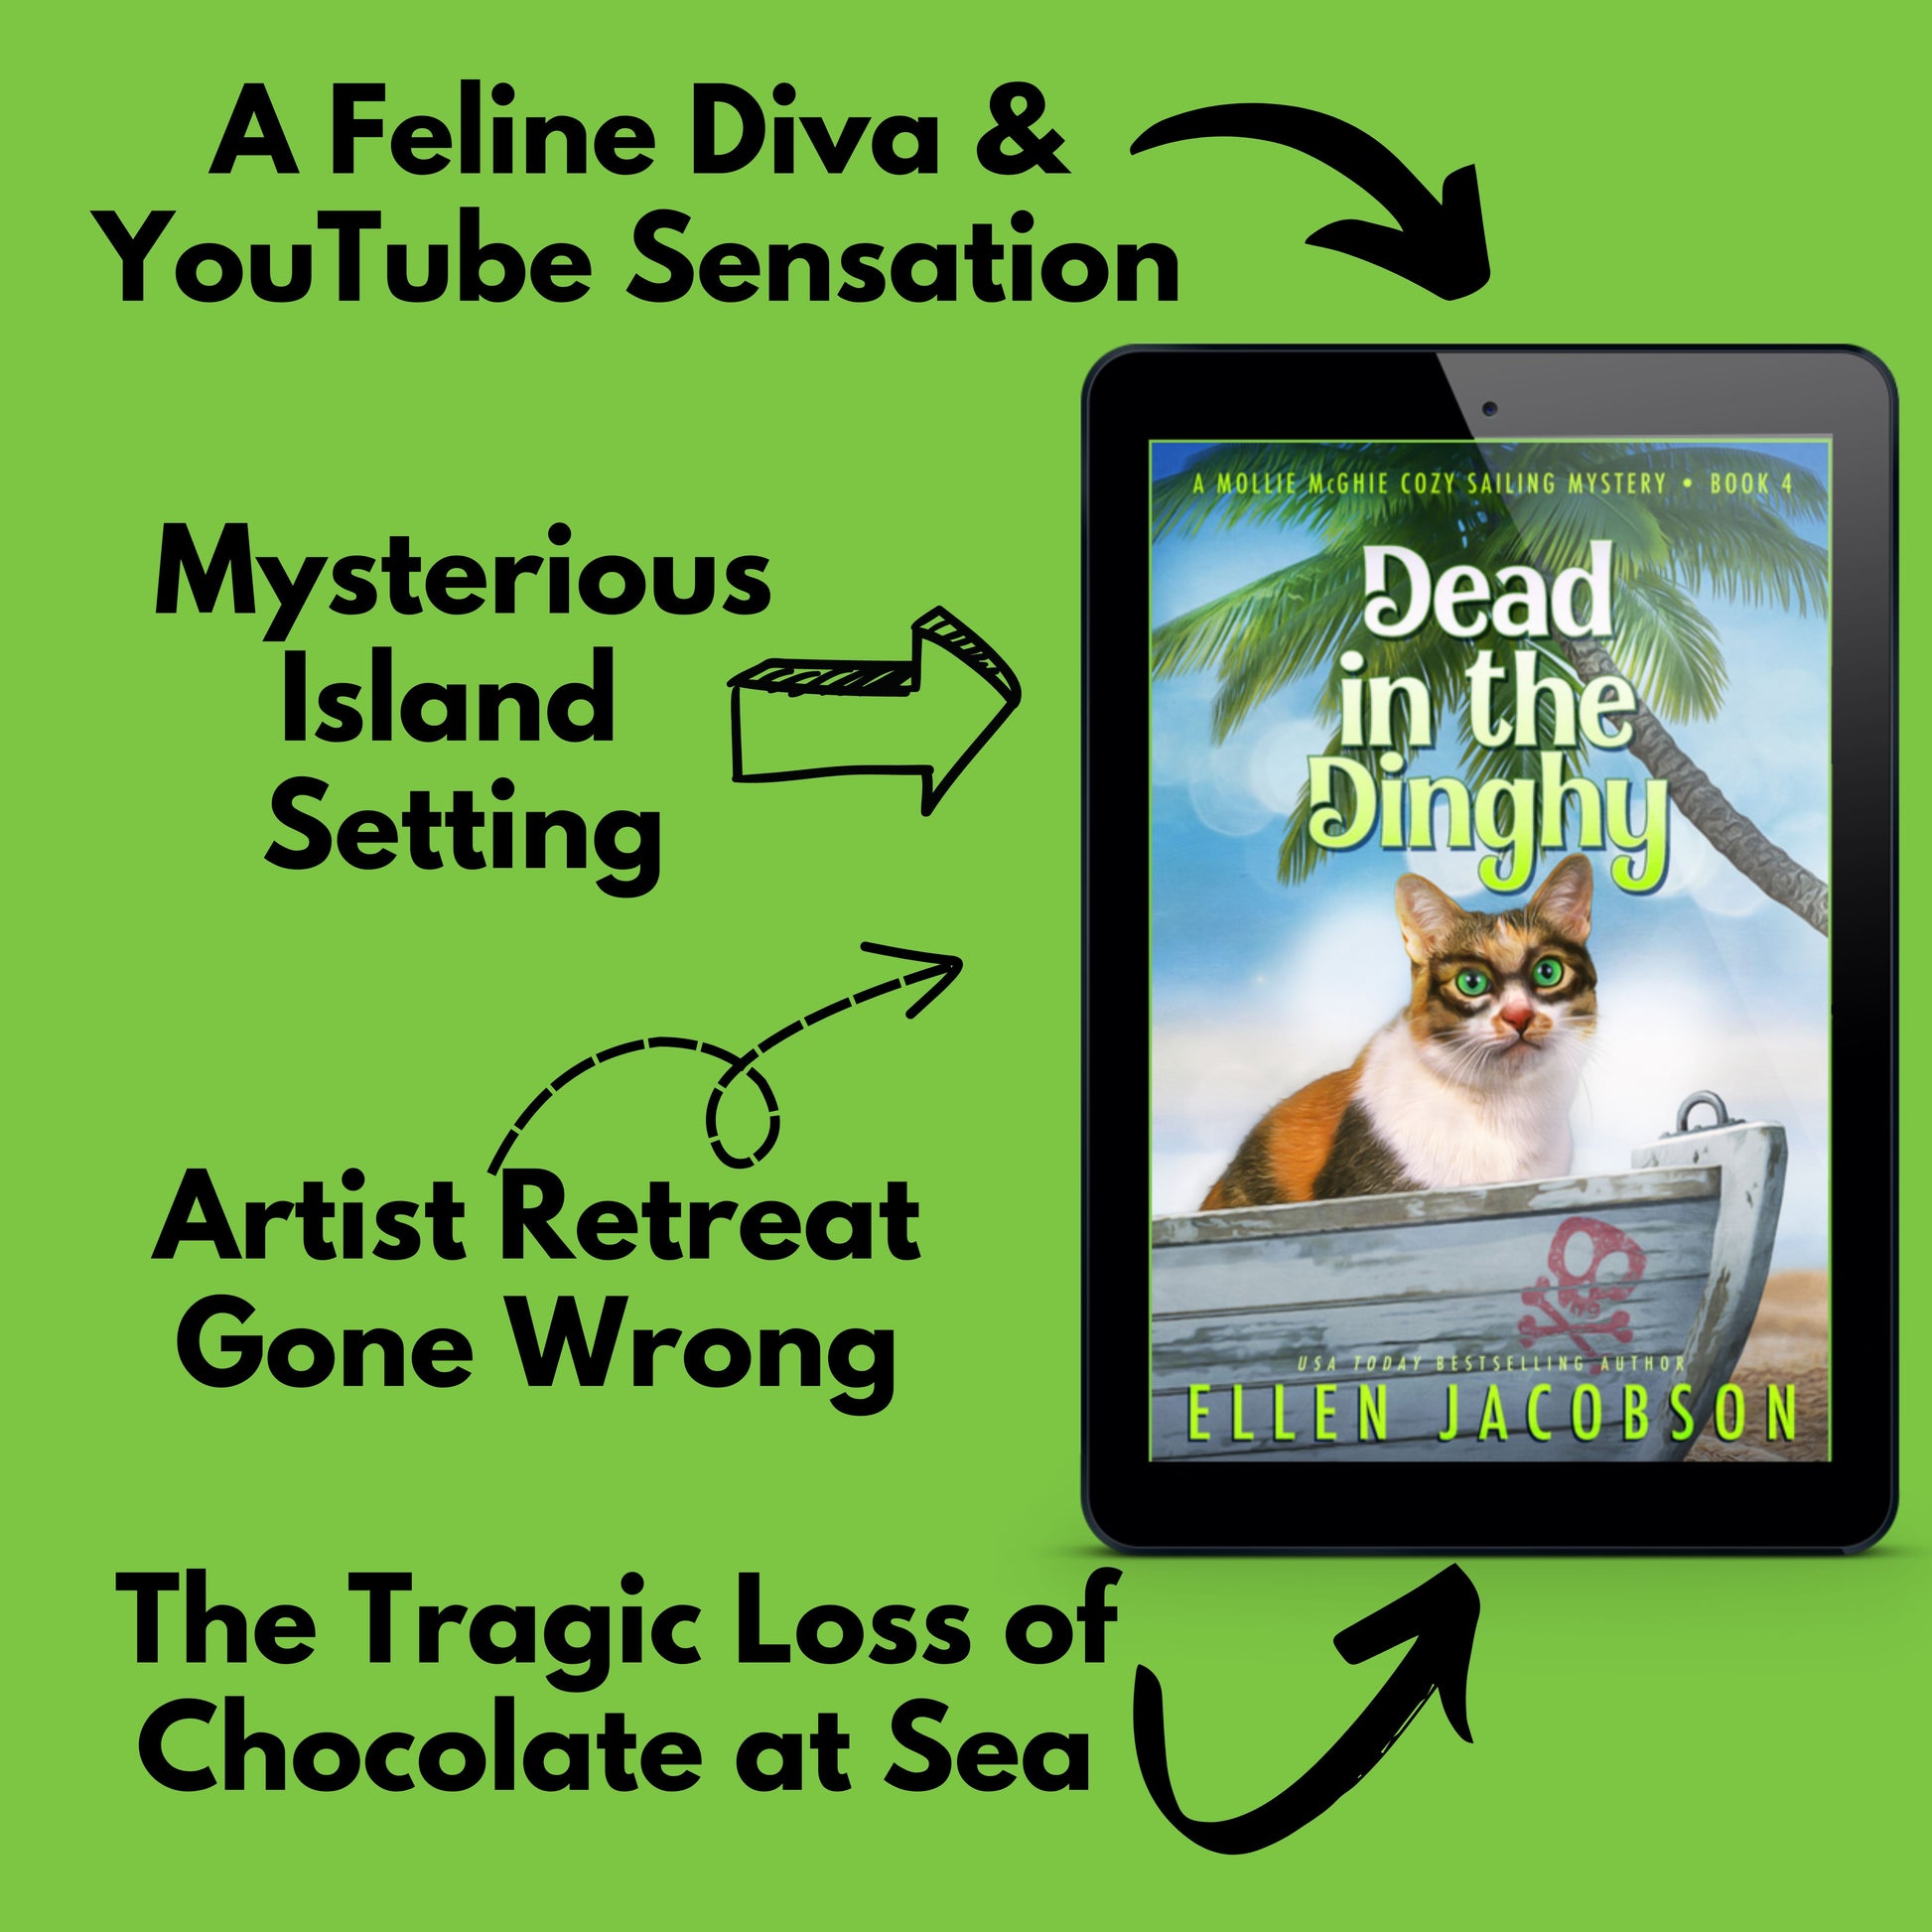 Dead in the Dinghy (Mollie McGhie Cozy Mystery #4) ebook cover with text that says a feline diva & YouTube sensation, mysterious island setting, artist retreat gone wrong, and the tragic loss of chocolate at sea